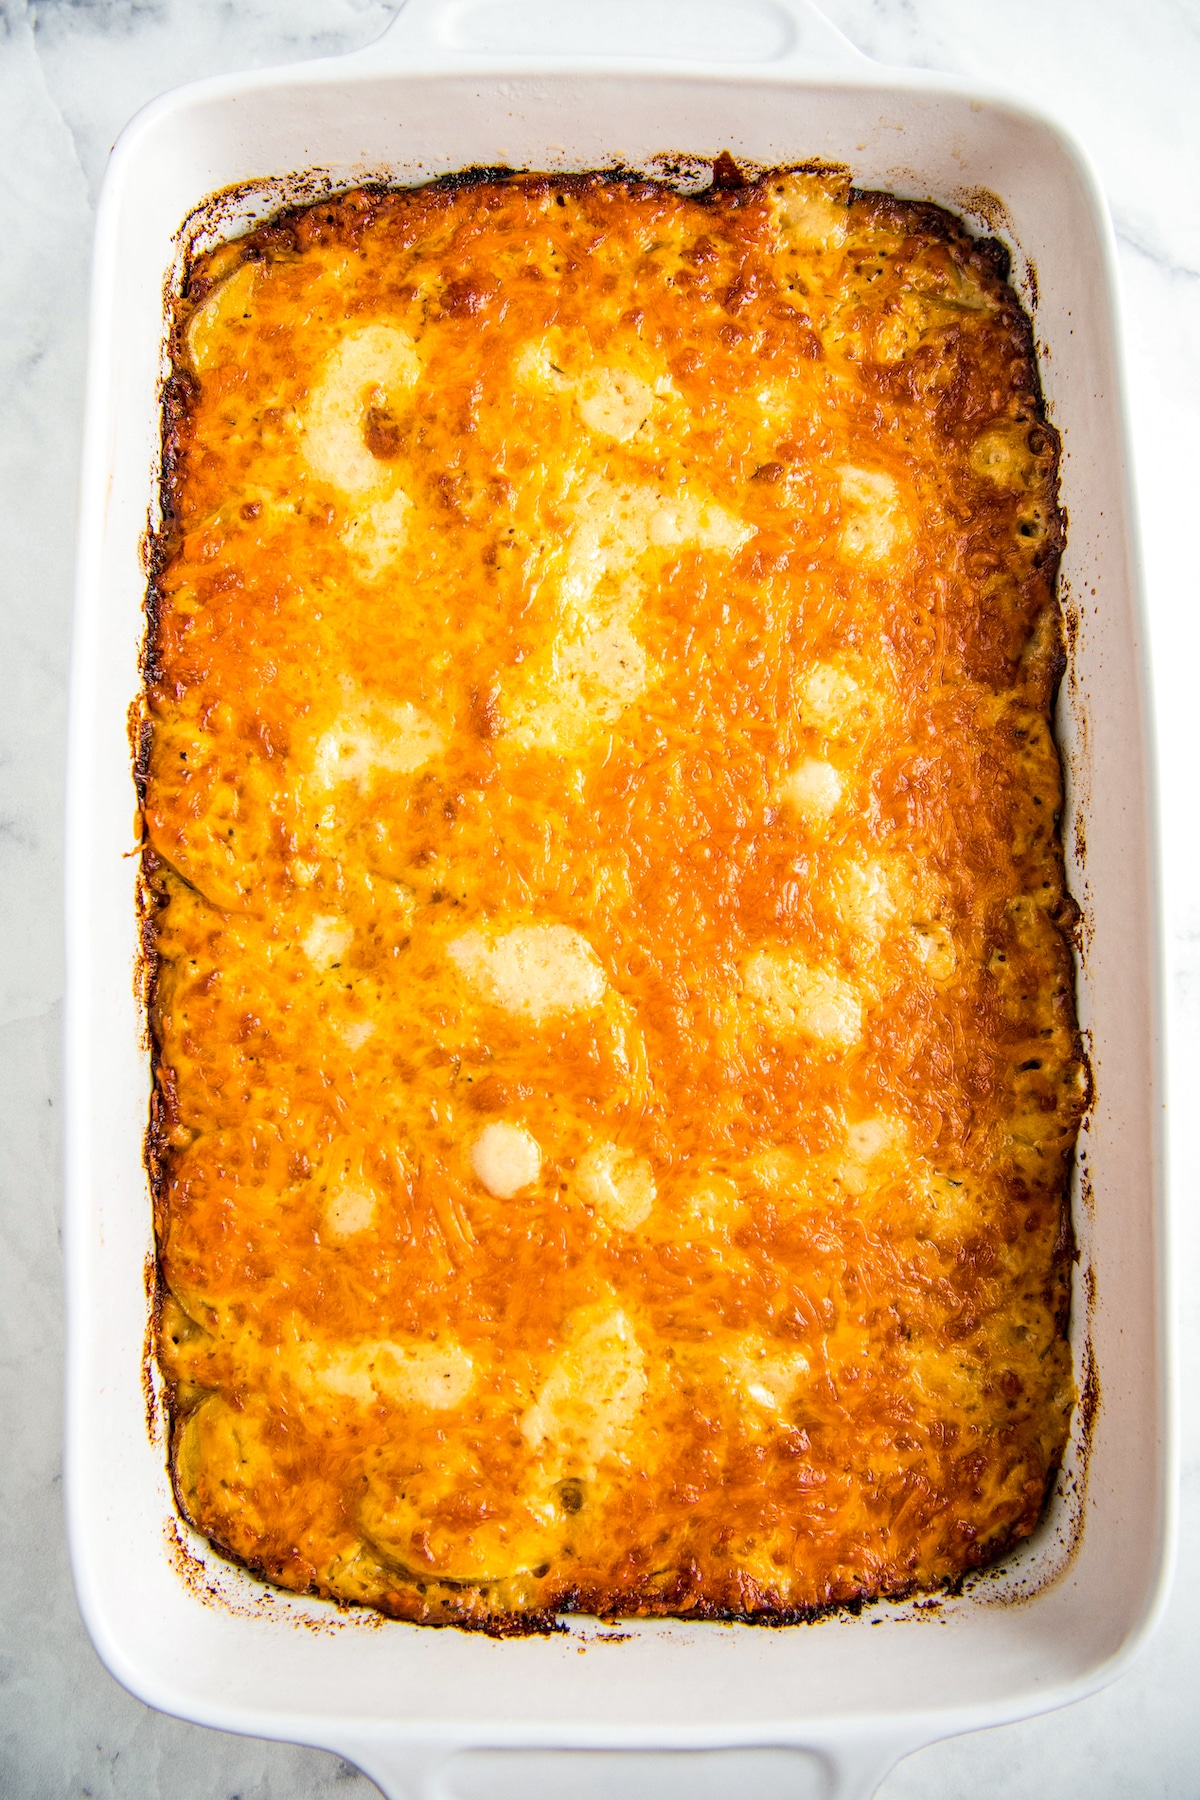 Baked casserole with melted cheese on top in a white casserole dish.